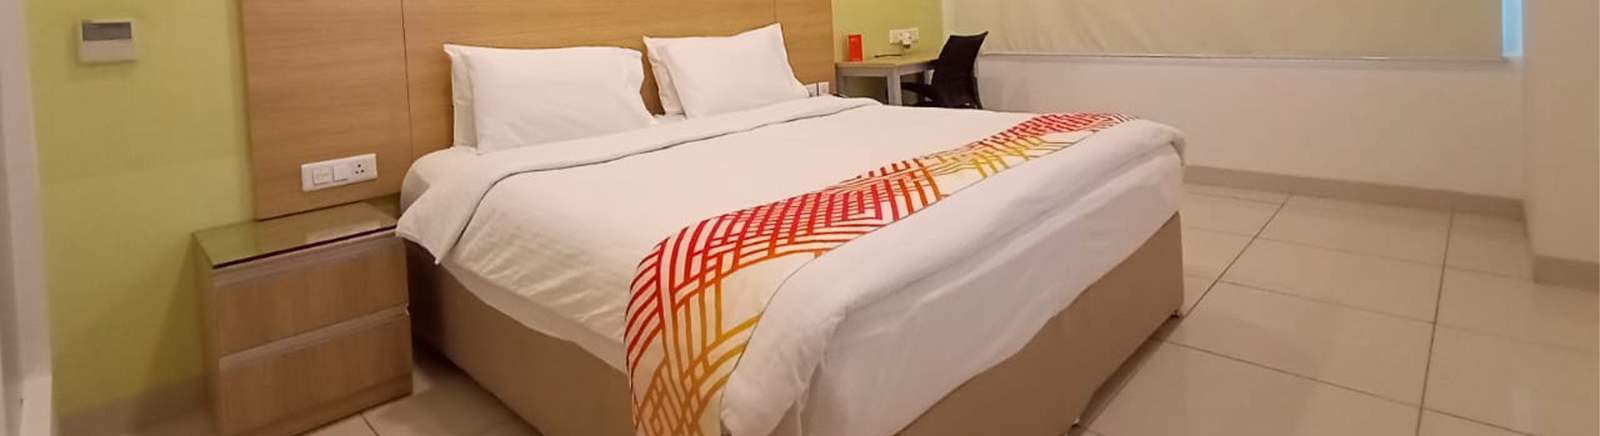 Ginger Noida Sector 63 (New) Hotel Rooms